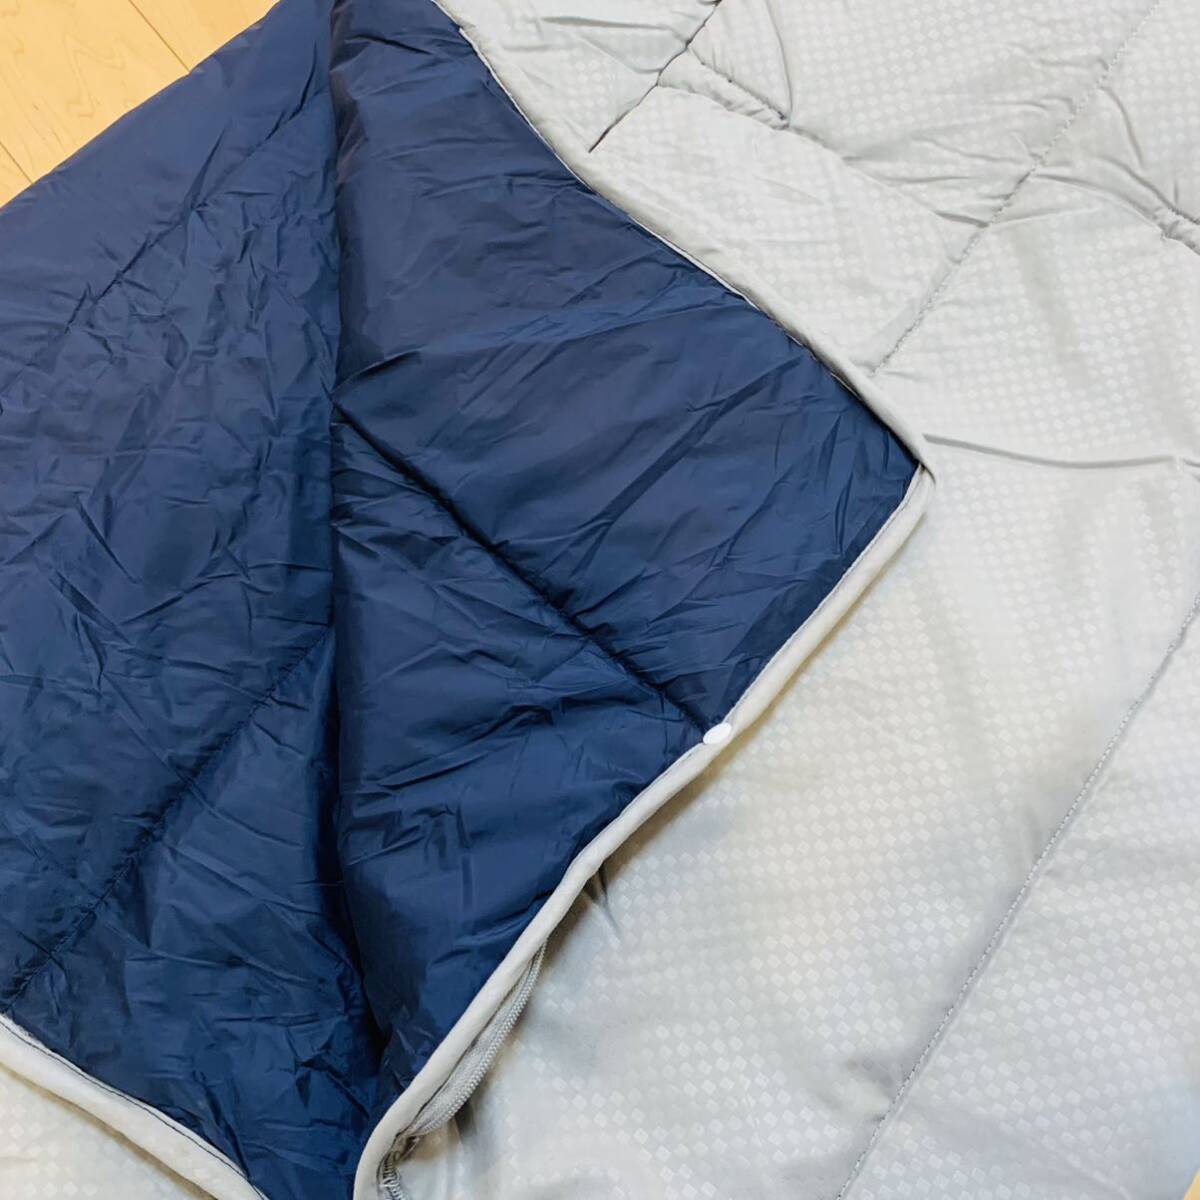  camp for put on shrimp fly sleeping bag protection against cold the best multifunction envelope type sleeping bag 135cmx195cm outdoor field mountain climbing 